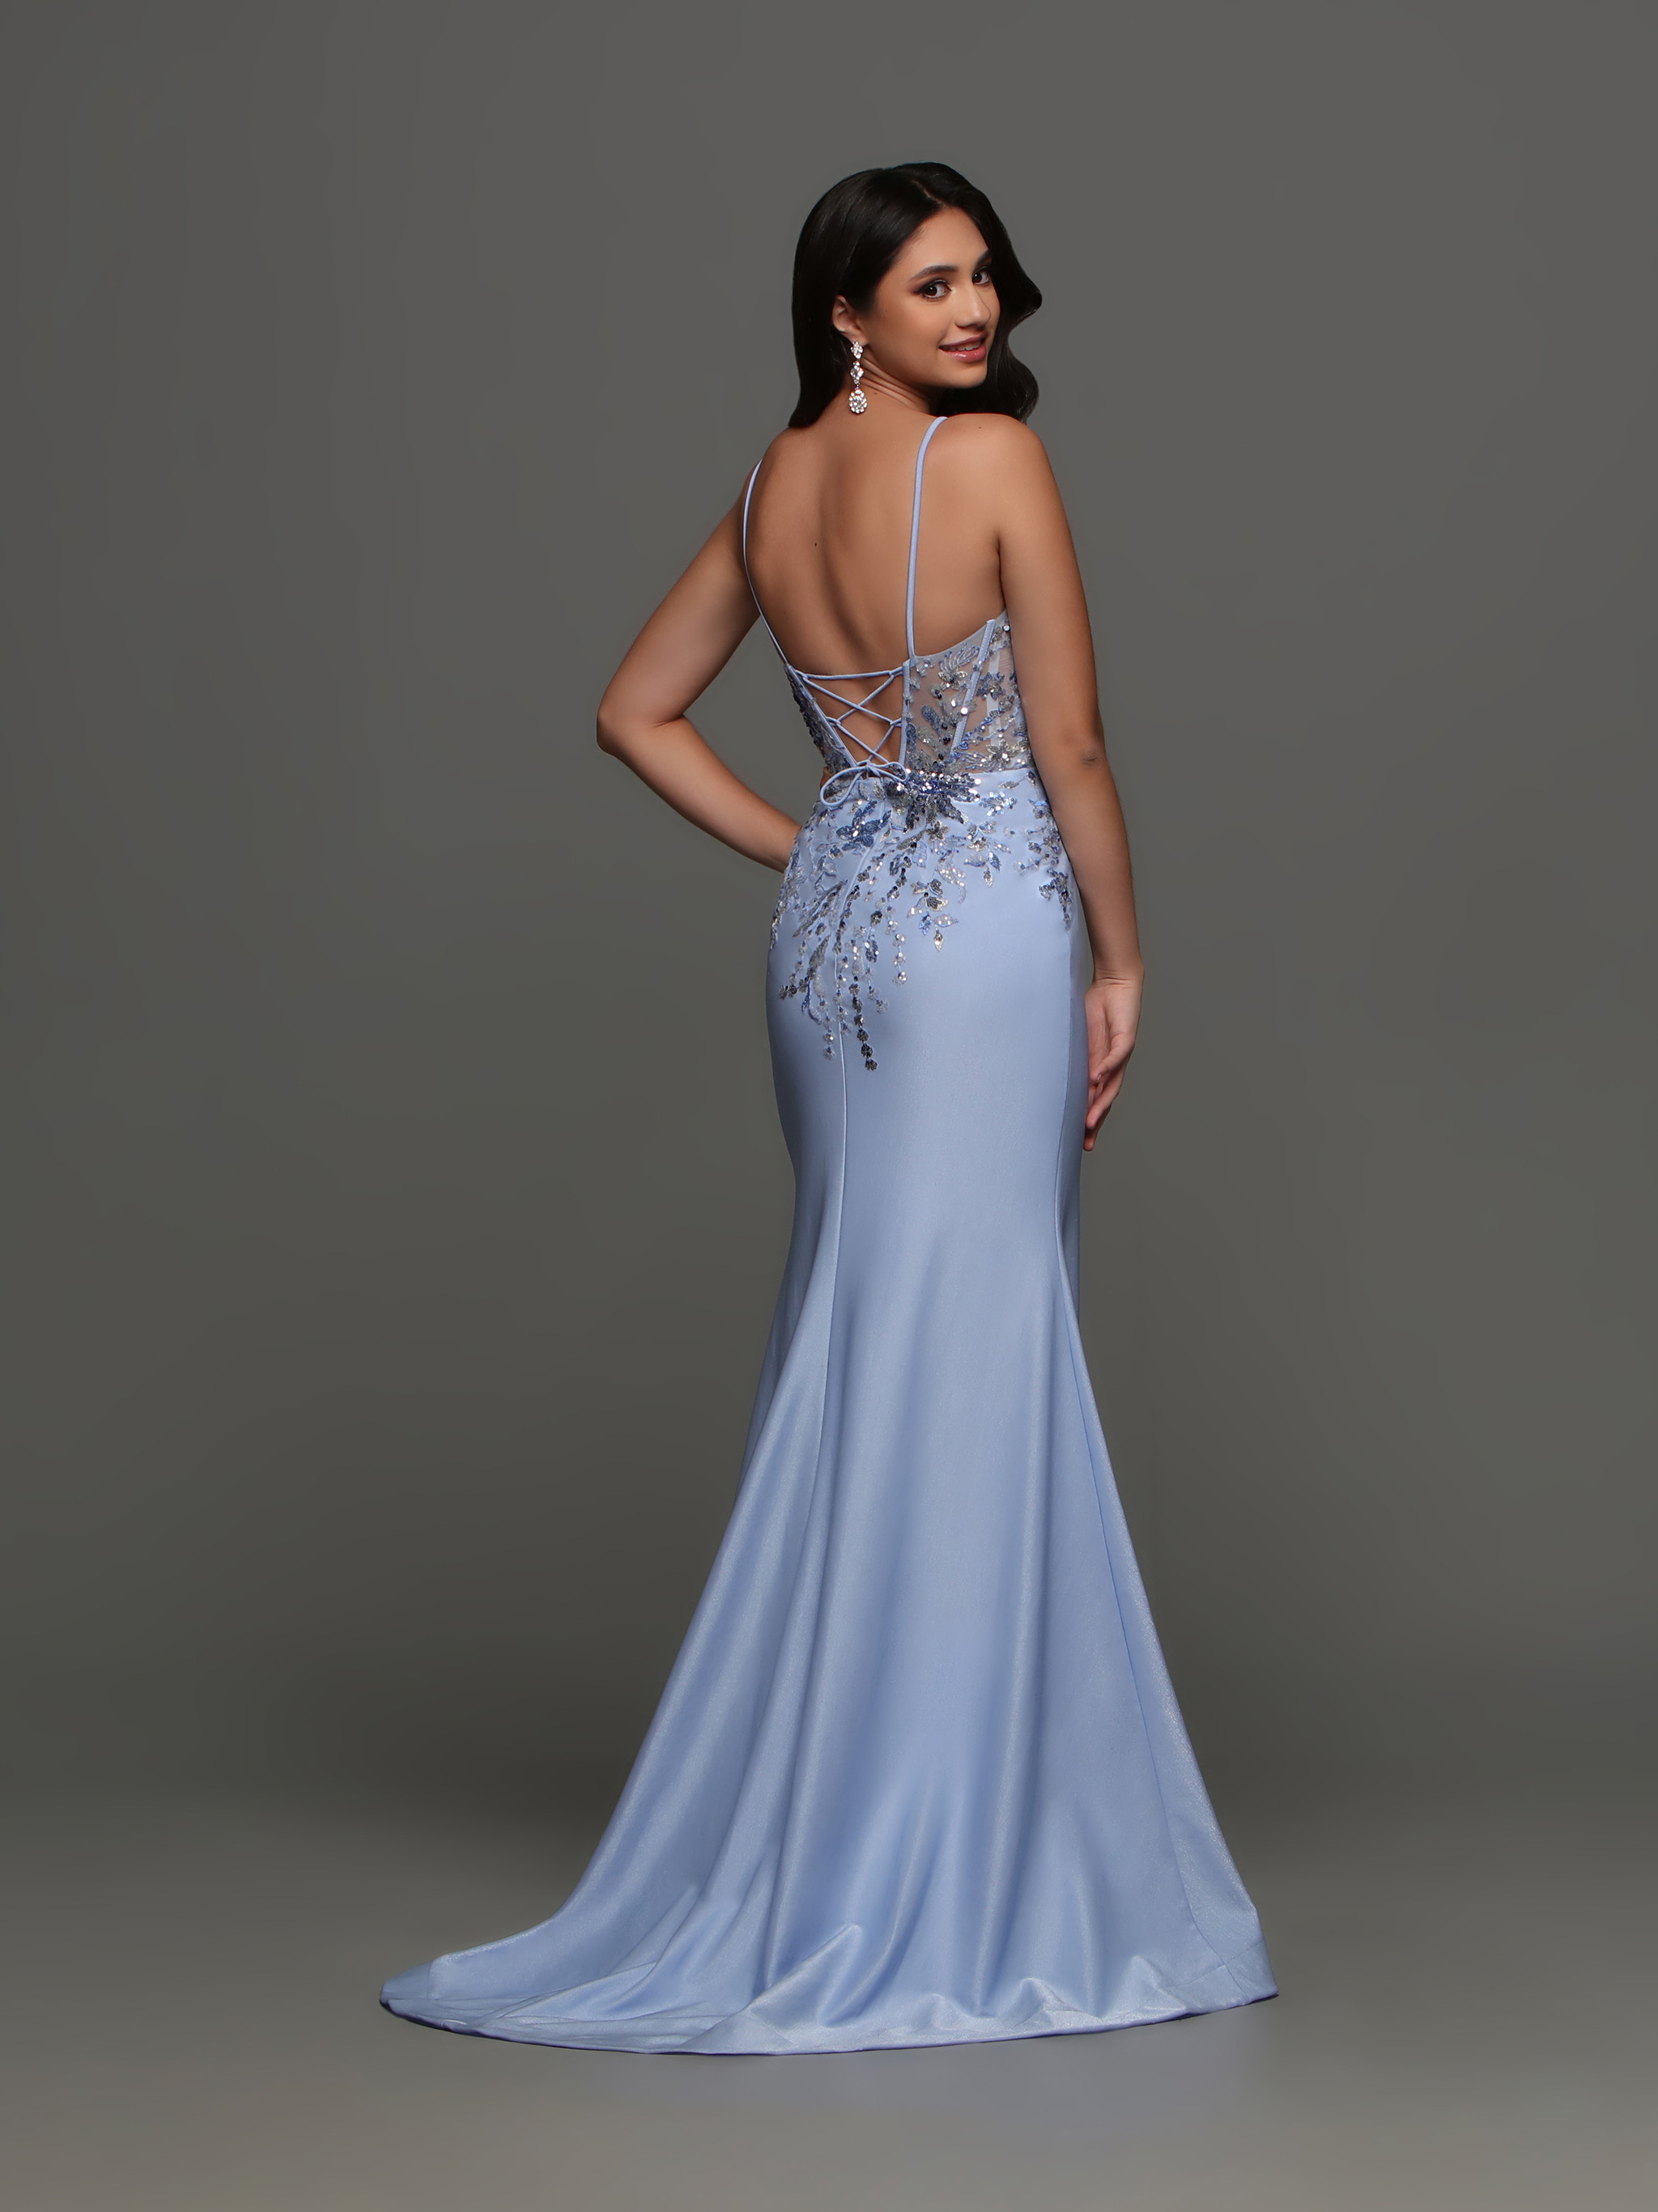 Image showing back view of style #72394